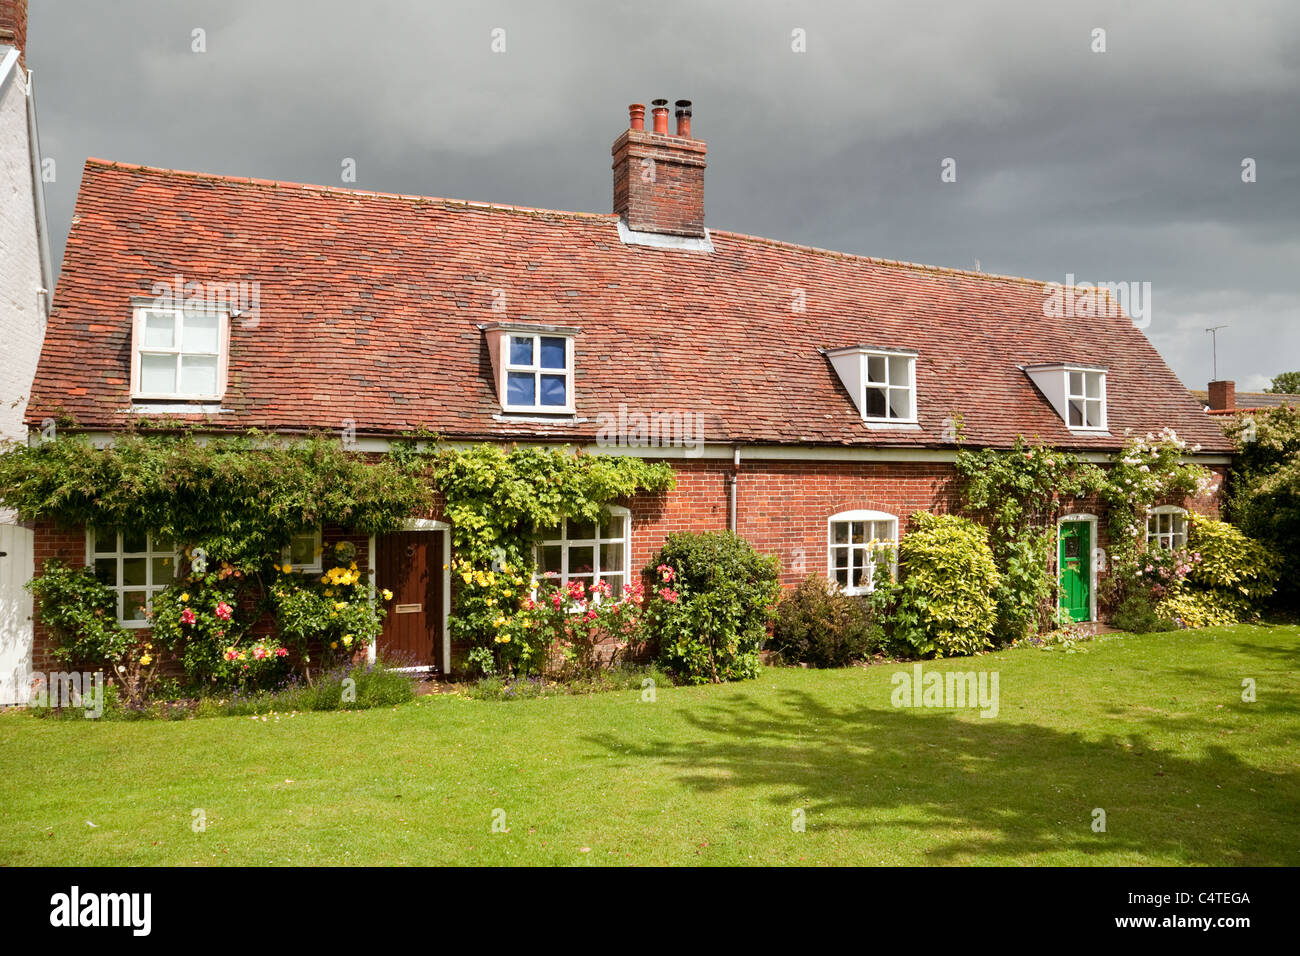 English Country Cottages Stock Photos English Country Cottages